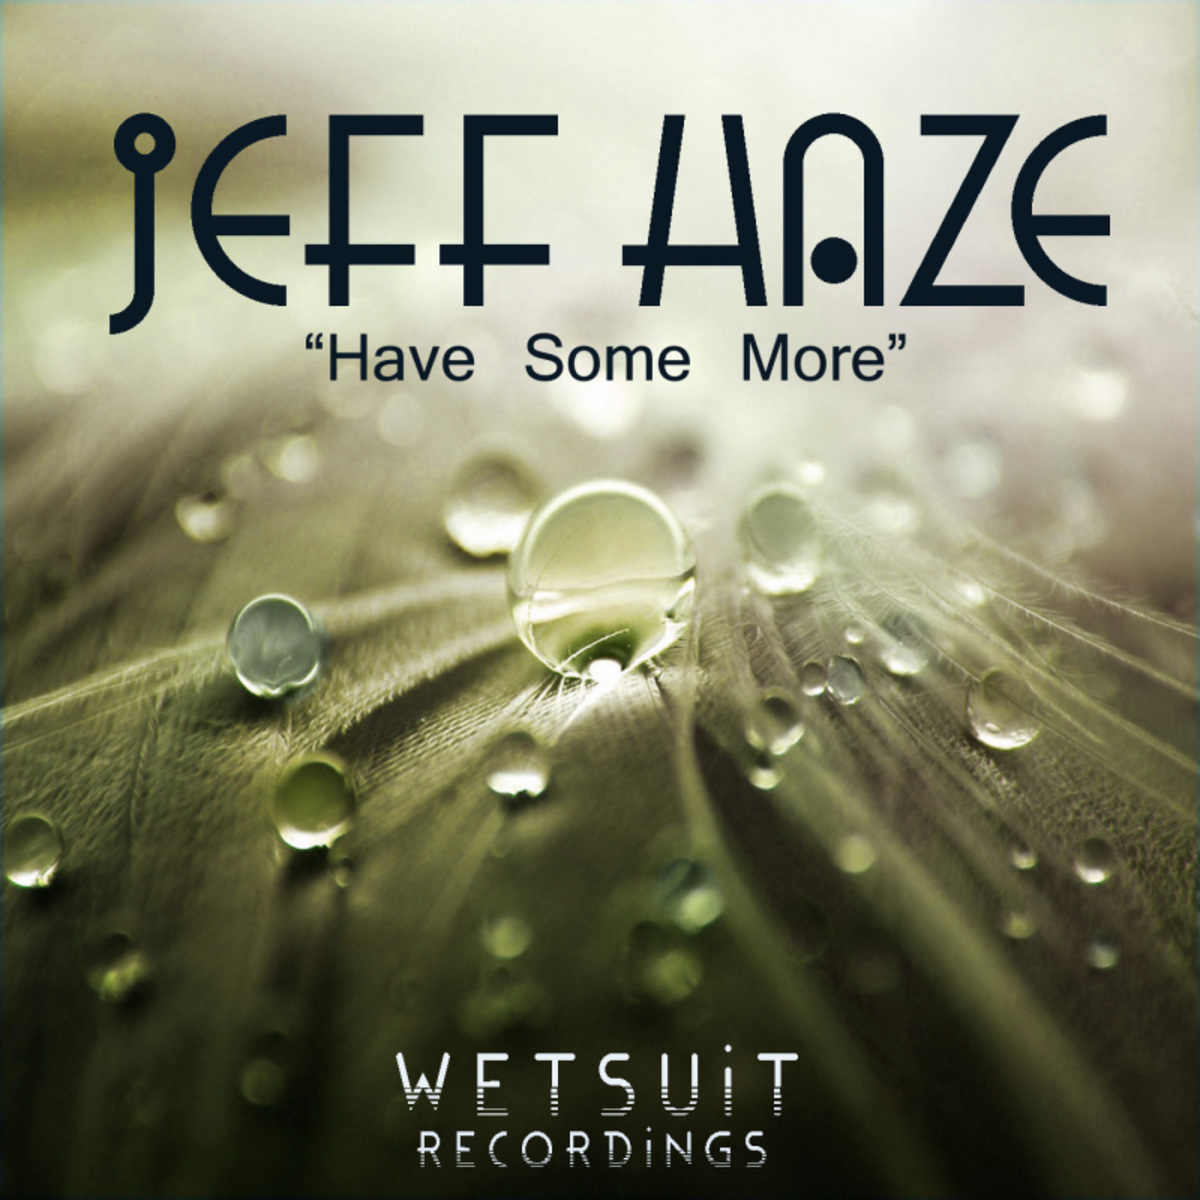 Jeff Haze - Have Some More / Wetsuit Recordings